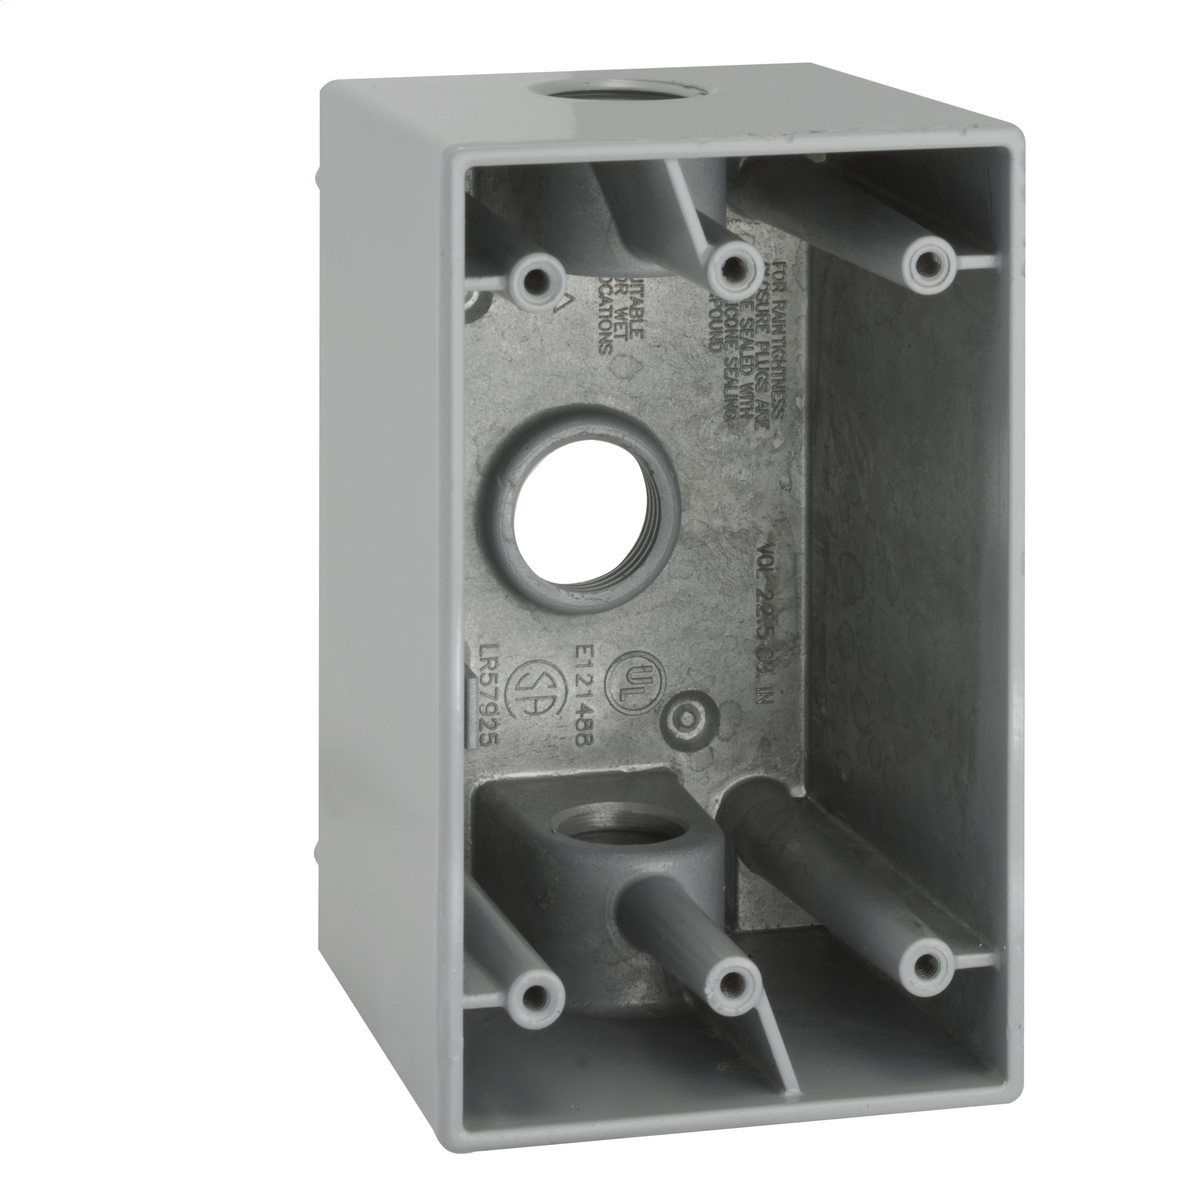 2-5/8 In. Deep, with Lugs - Three Threaded Outlets - 4-1/2 In. x 2-3/4In., (3) 1/2 In. Outlets